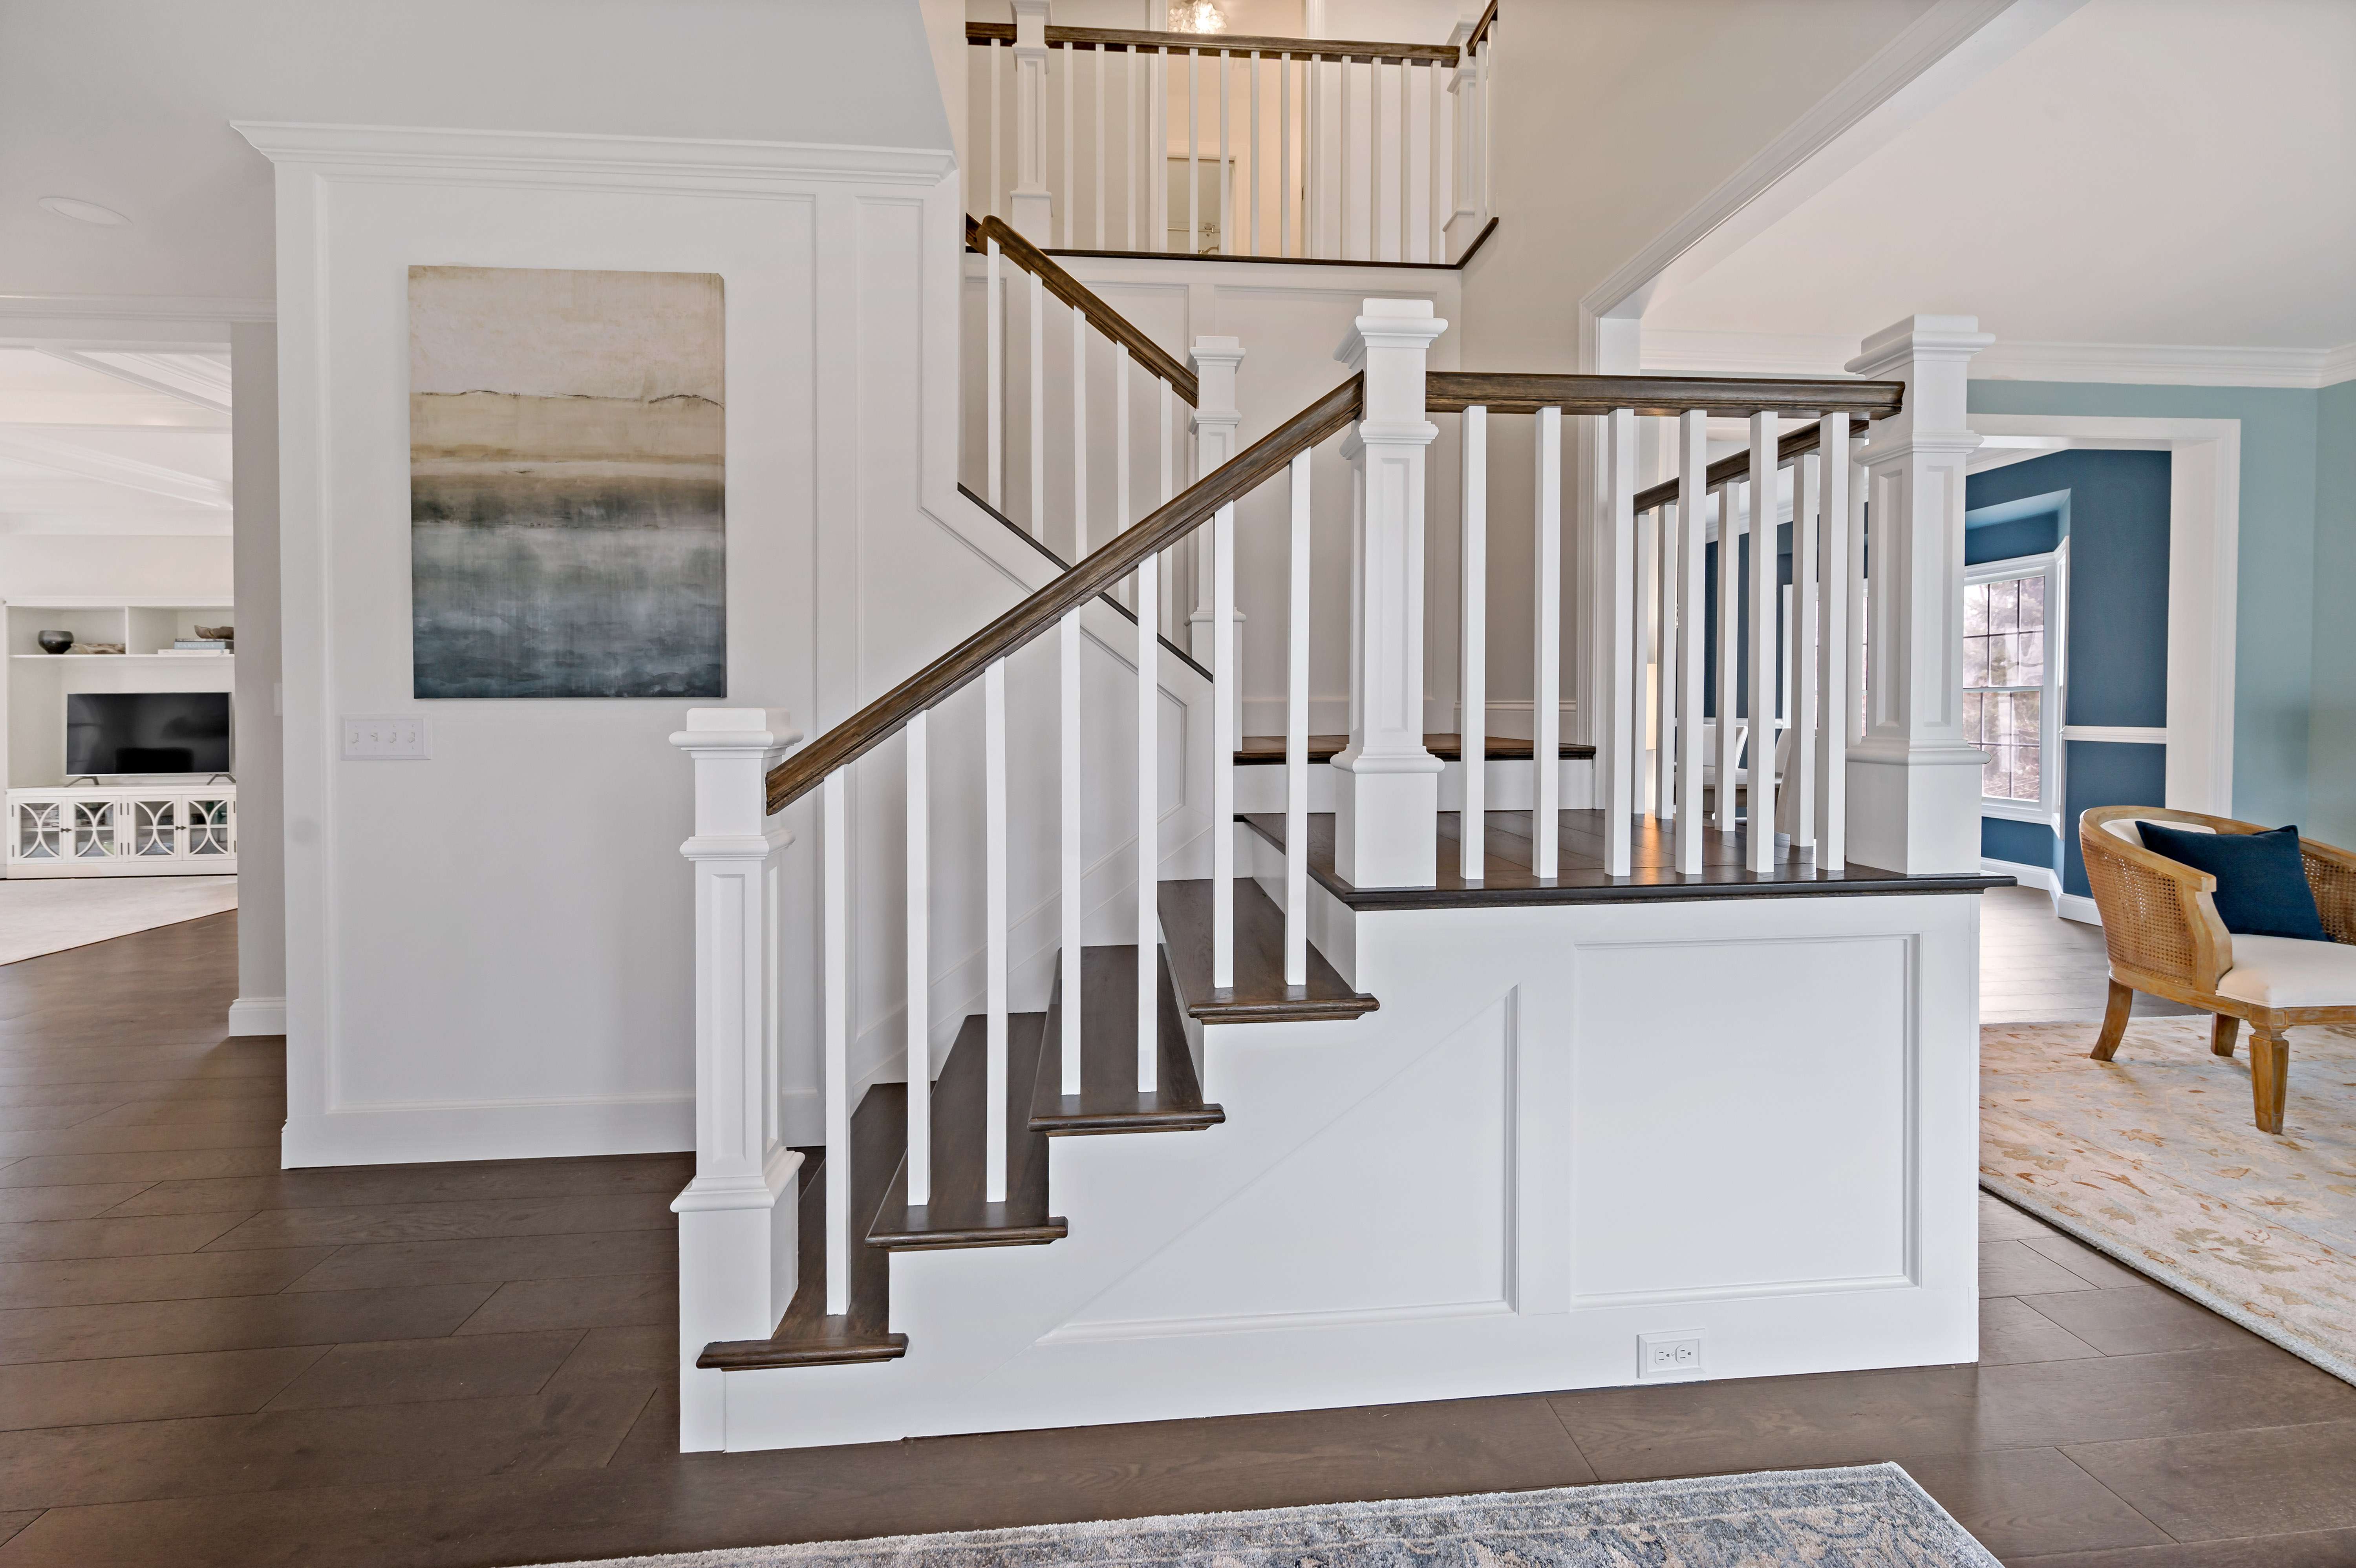 Stairwell in foyer with landing